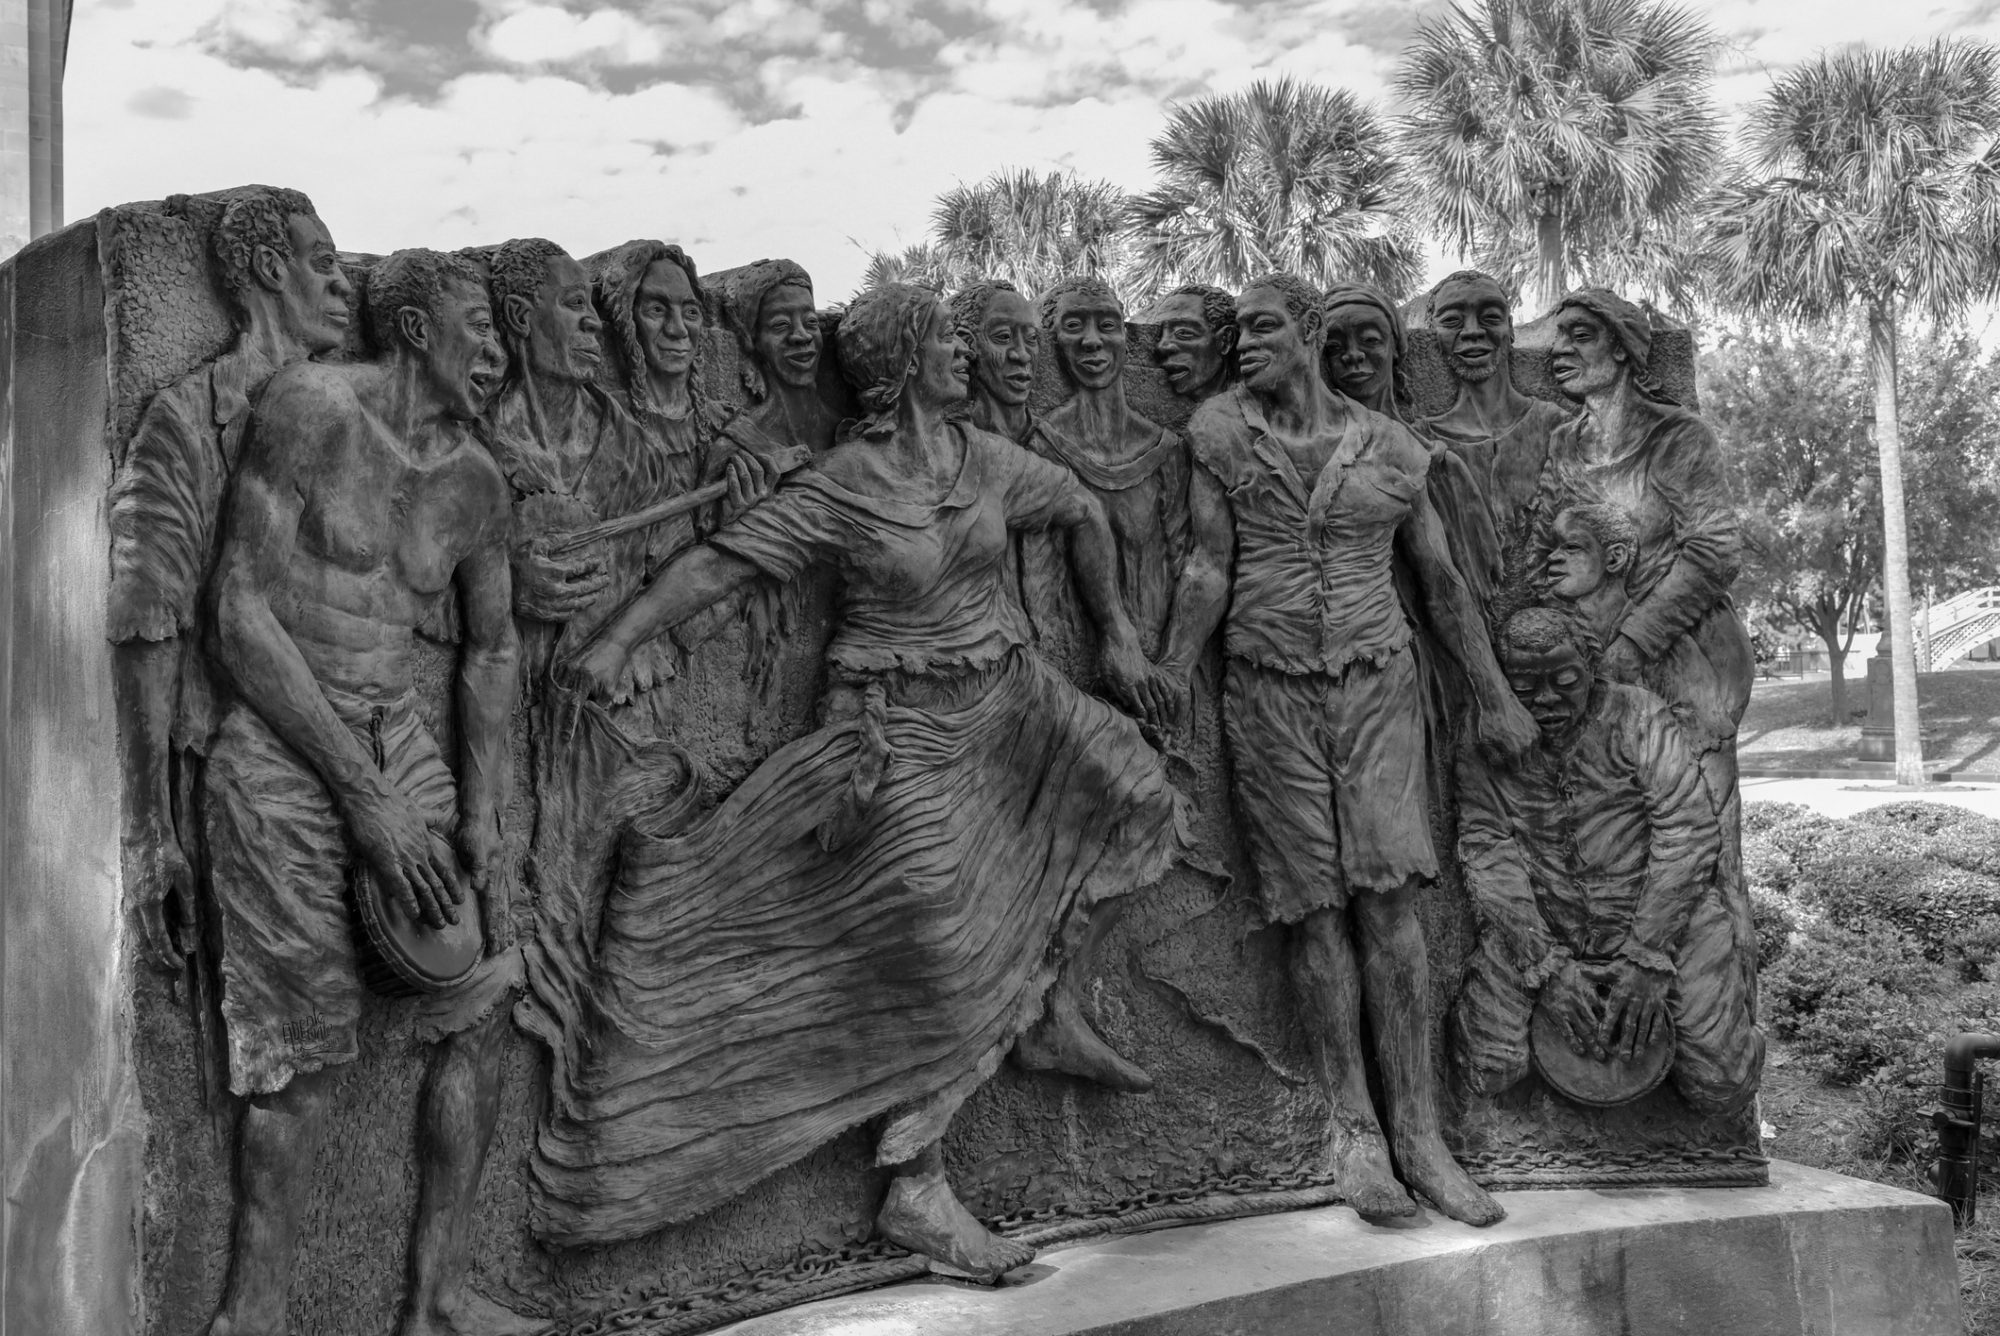 Sculpture of dancing slaves in the congo square at Louis Armstrong park in U.S. 